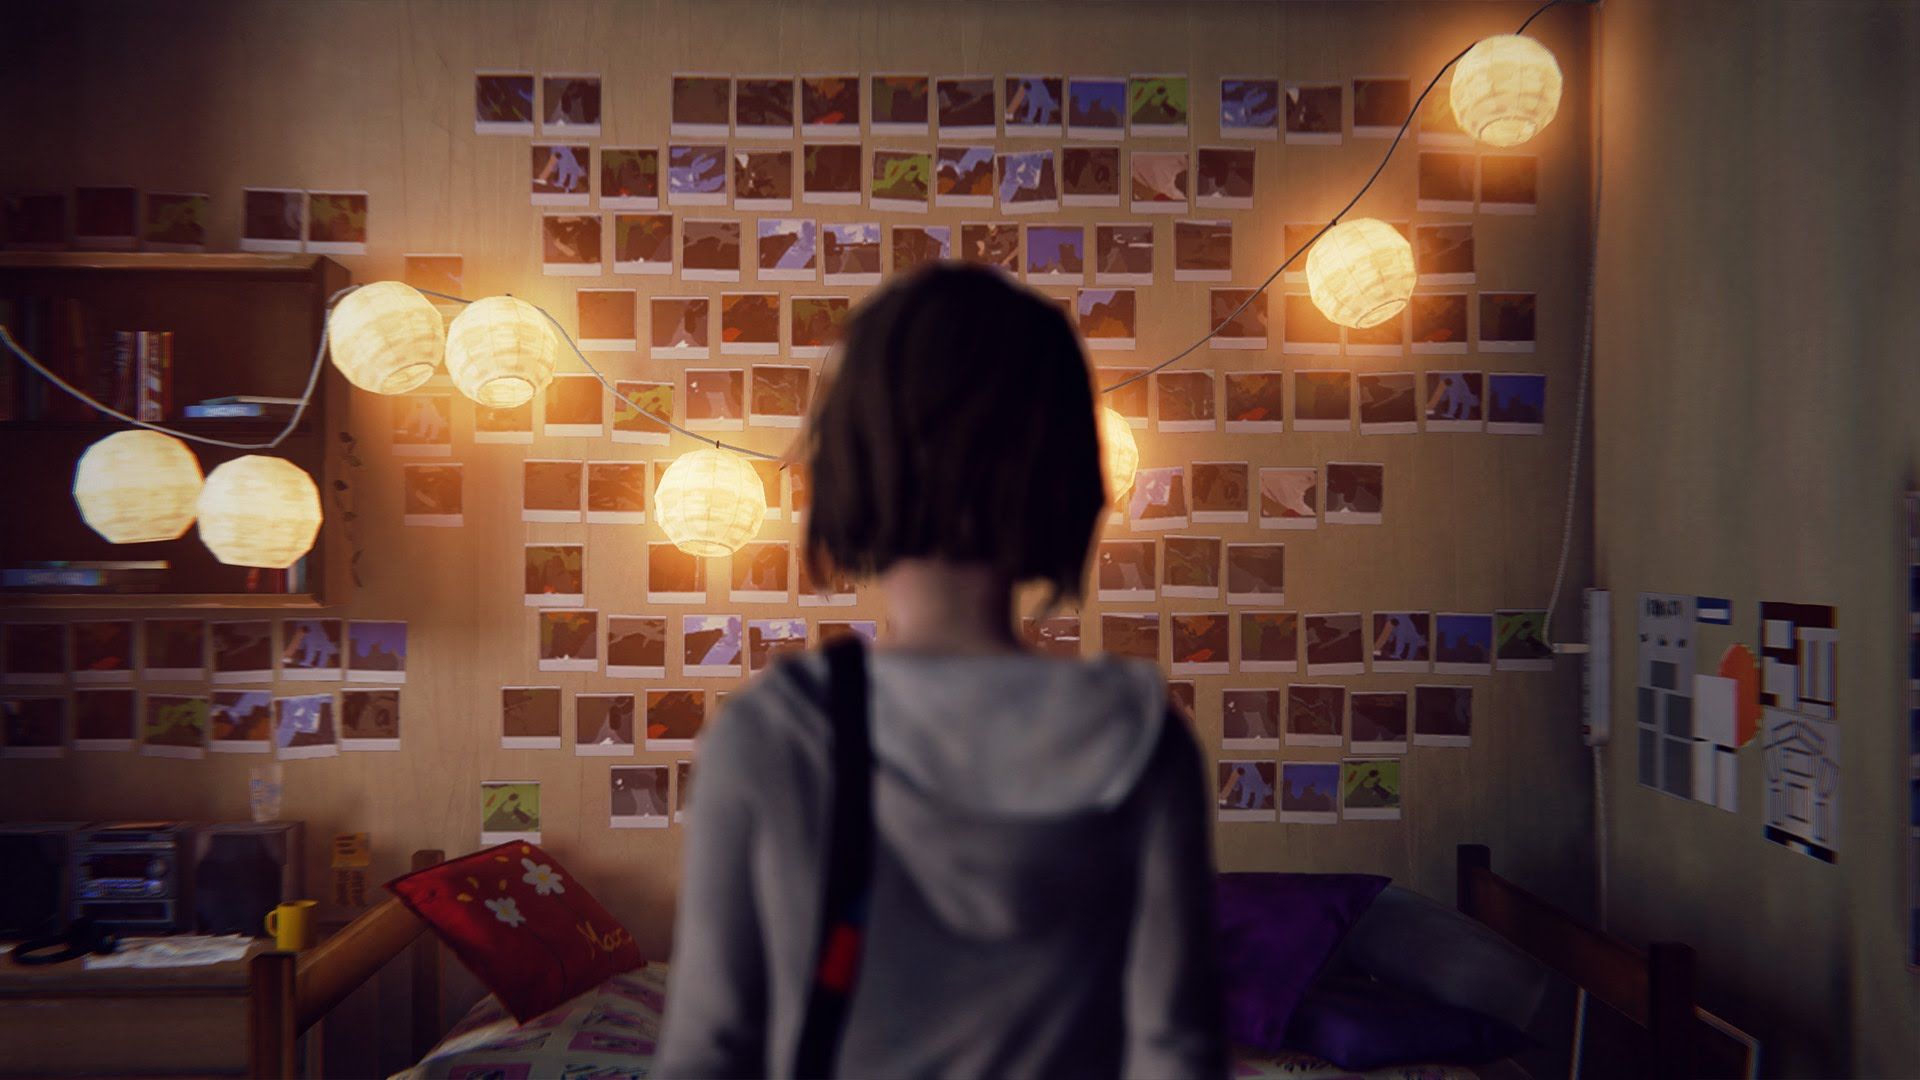 Life is Strange is awesome